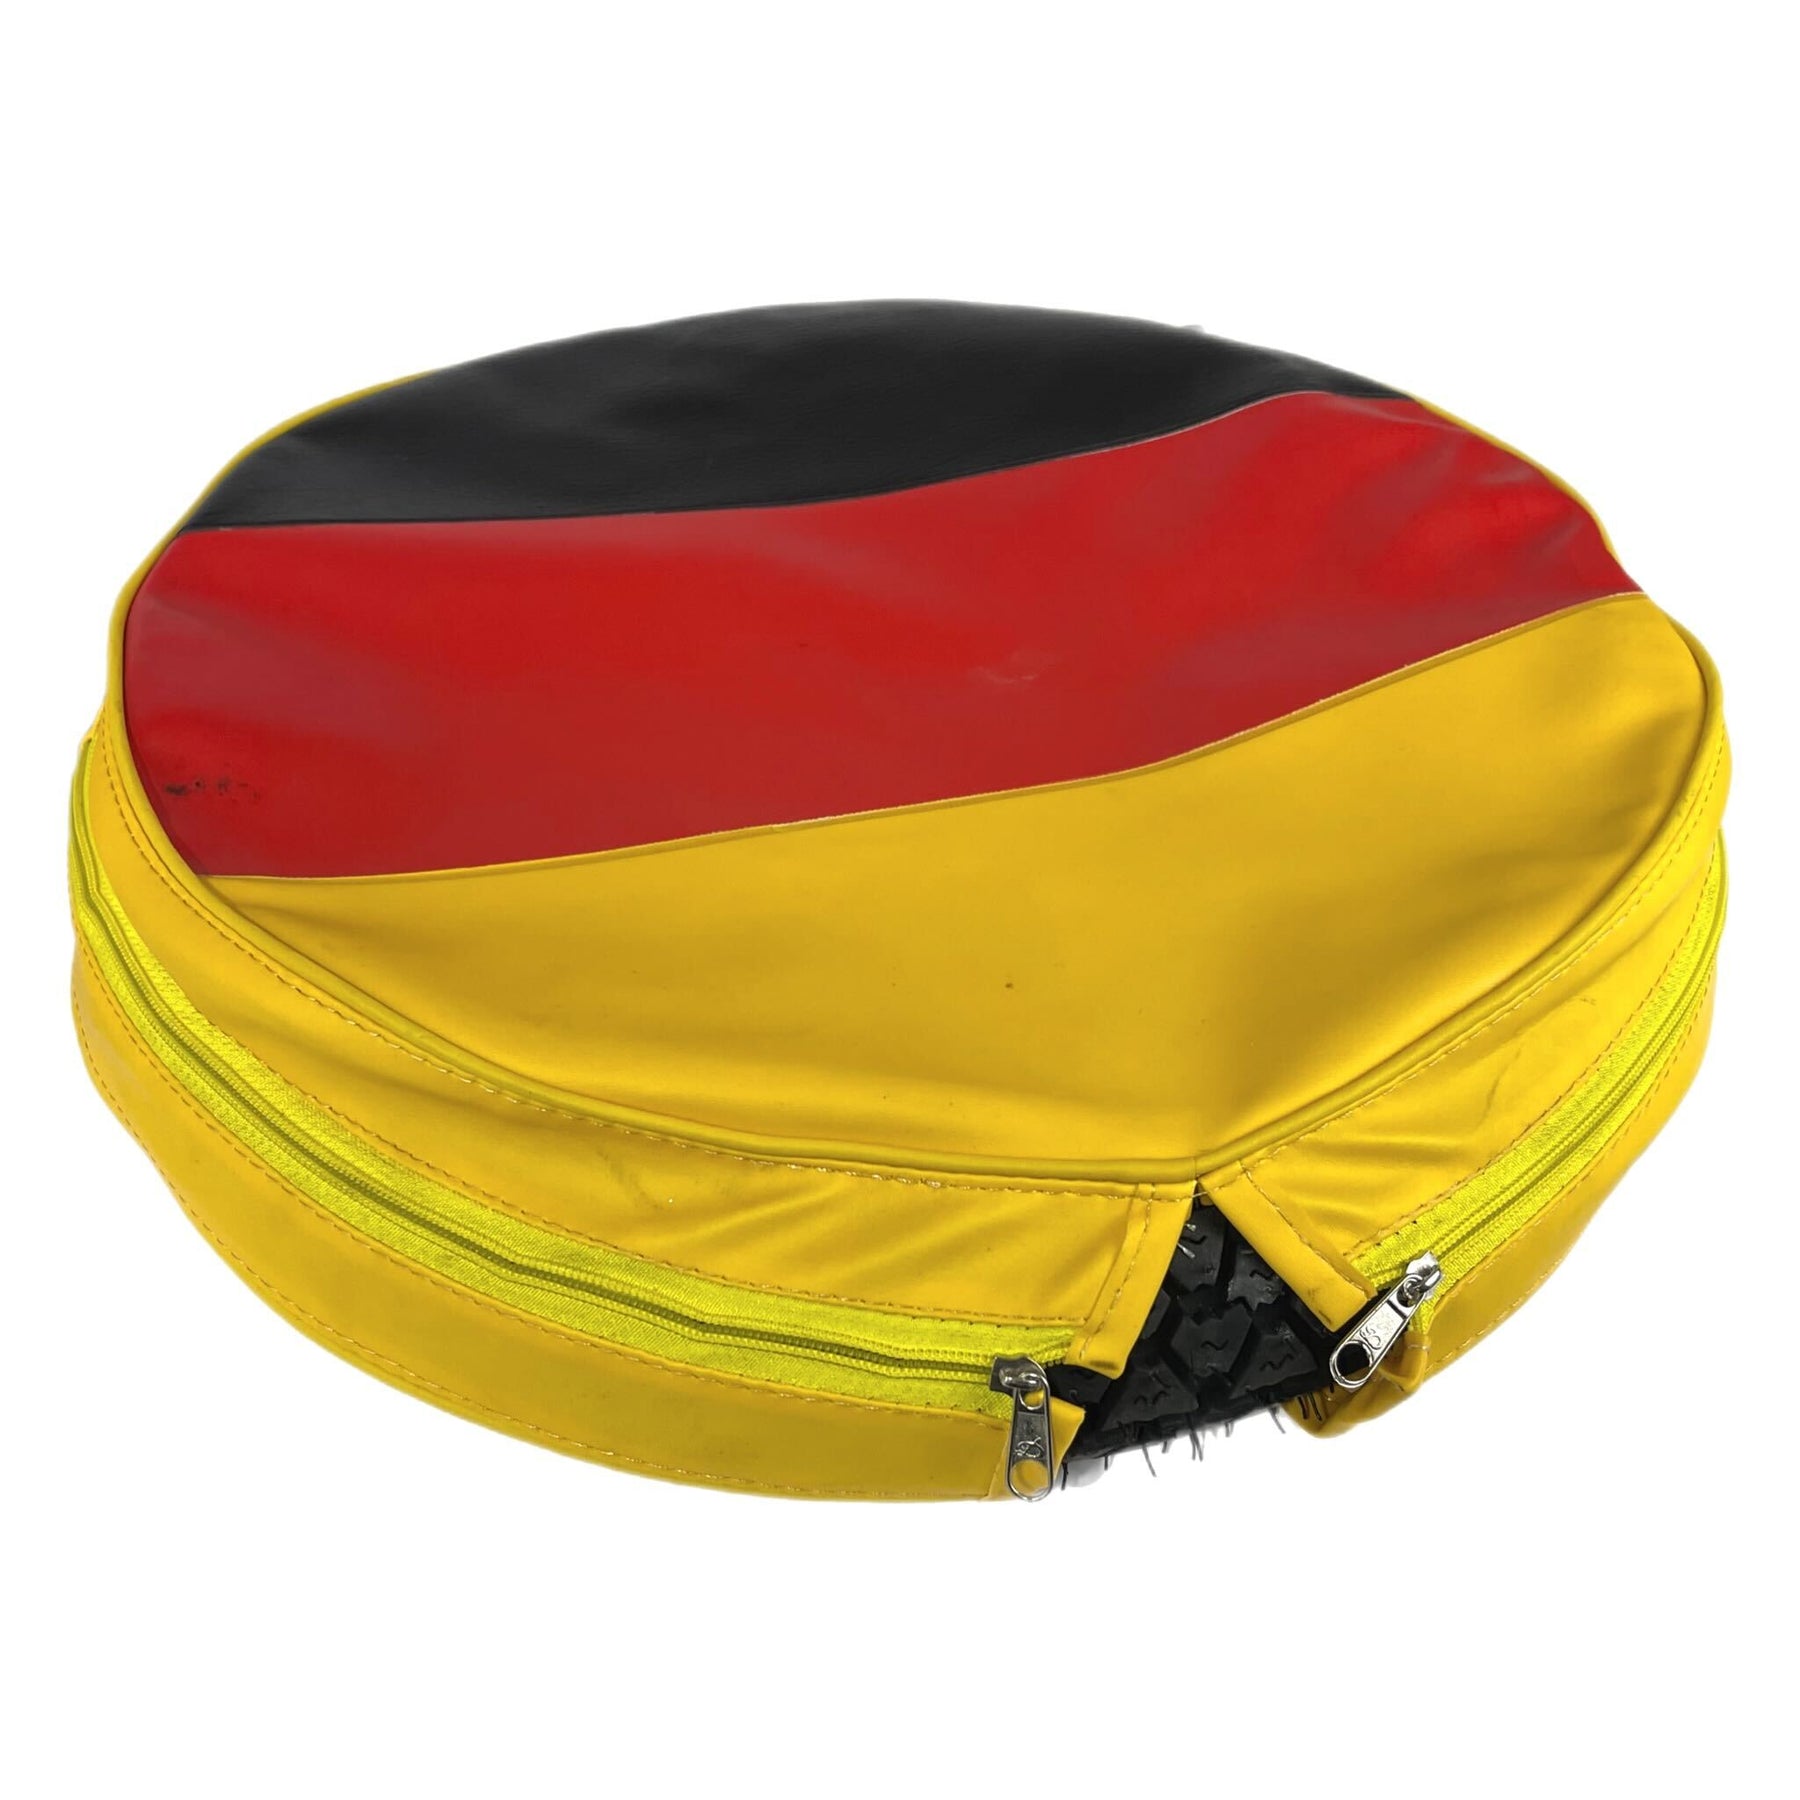 Vespa Lambretta Scooter German Flag 10" Spare Wheel Cover With Yellow Back